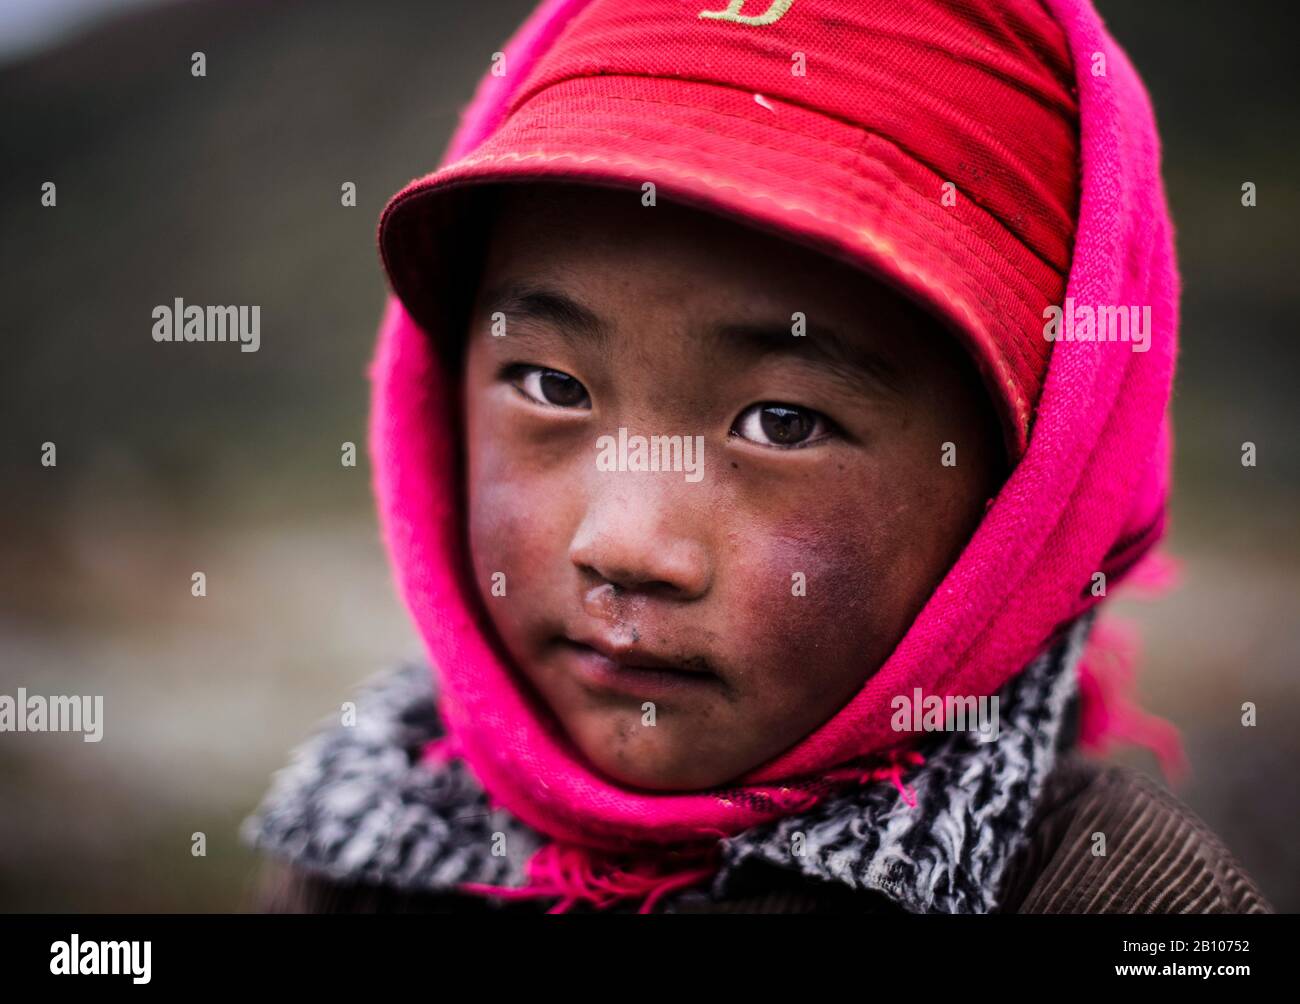 Portrait of a Tibetan child with cheeks flushed by the harsh weather and cold, typical feature of the Tibetan people, Kham province, highlands of Tibet Stock Photo